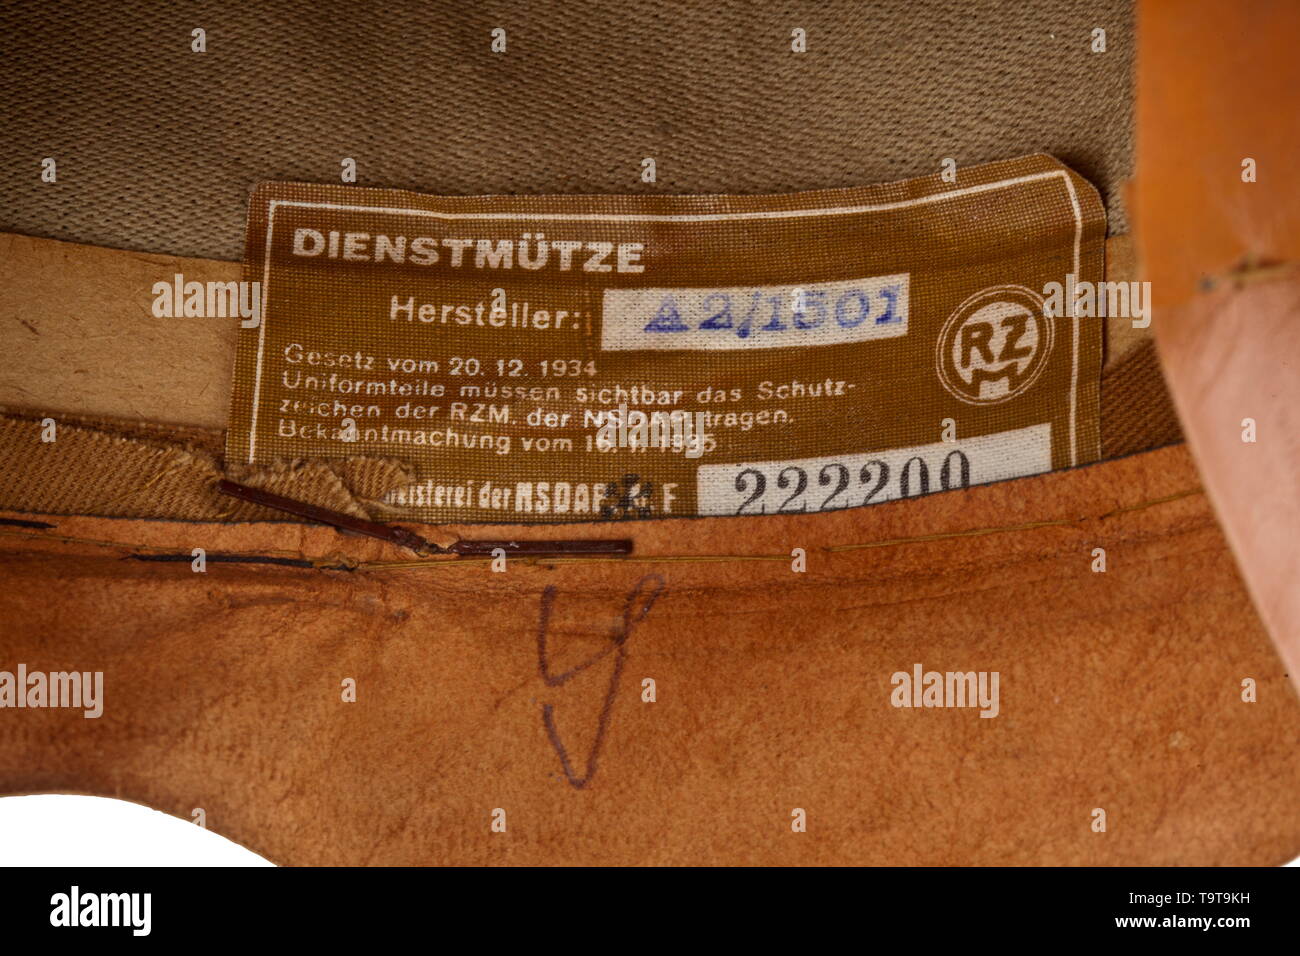 A kepi for enlisted men/NCOs of the SA groups Donau or Alpenland depot piece with RZM tag historic, historical, 20th century, Editorial-Use-Only Stock Photo